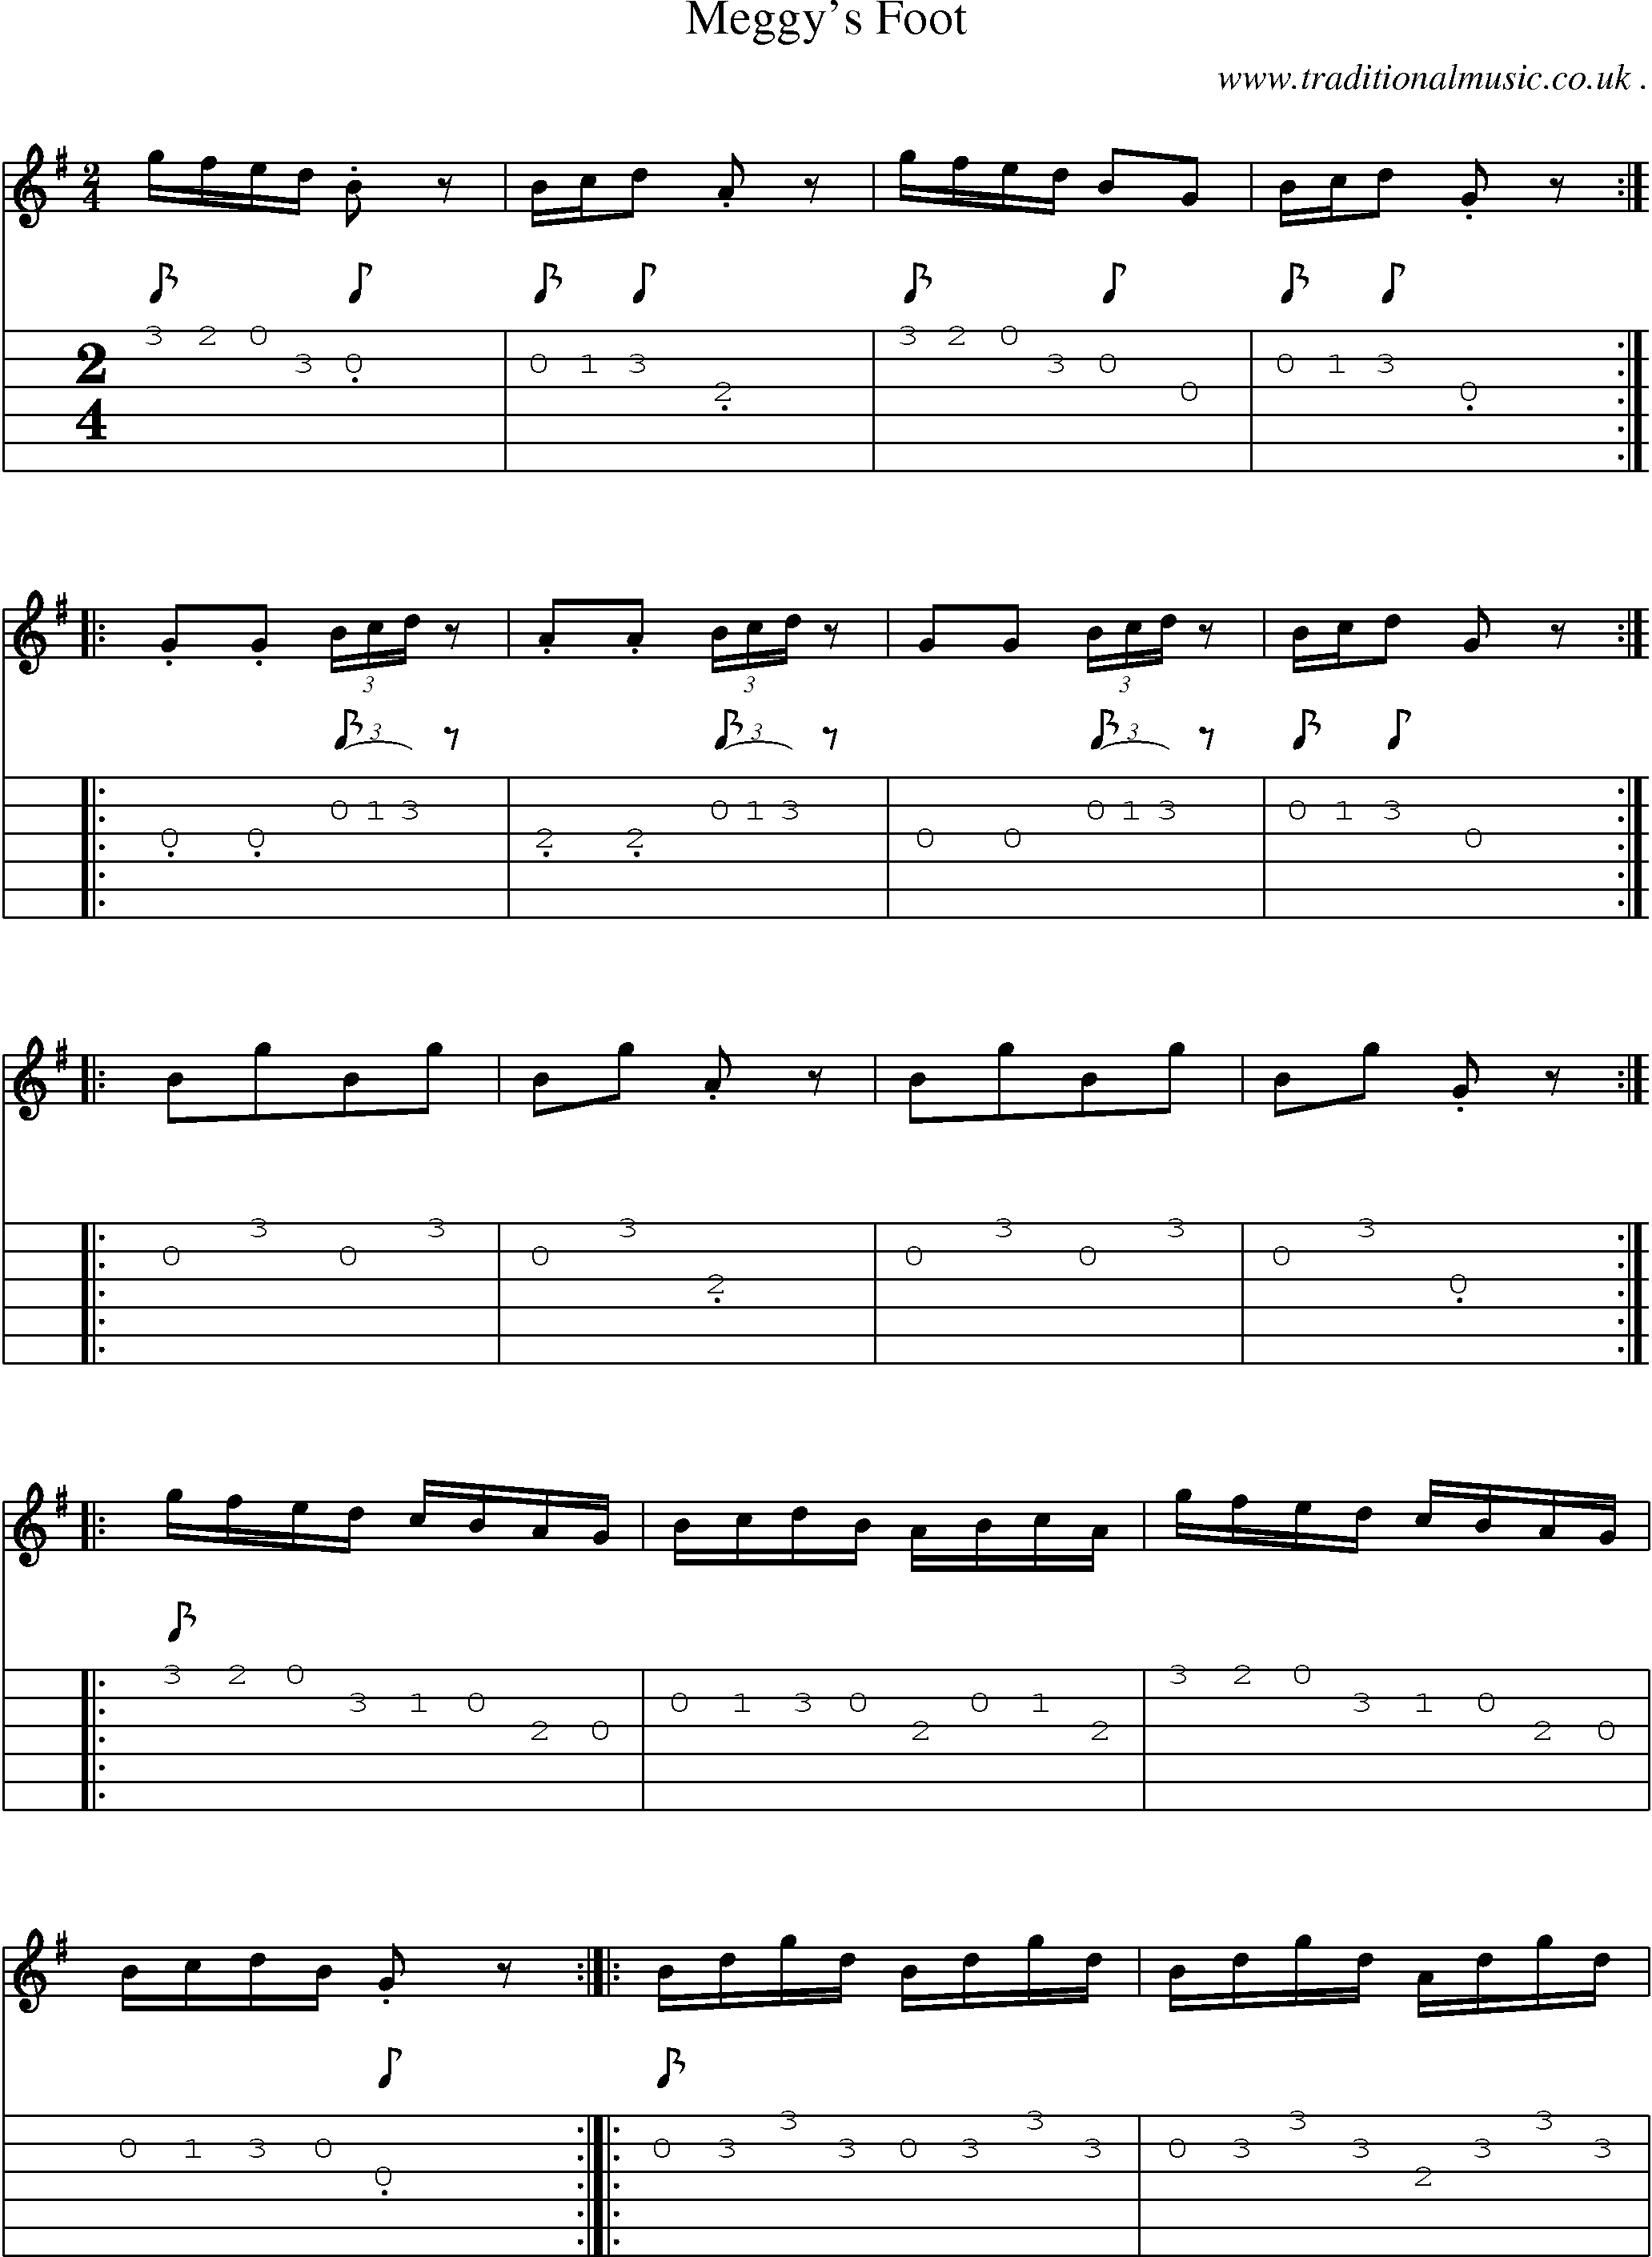 Sheet-Music and Guitar Tabs for Meggys Foot